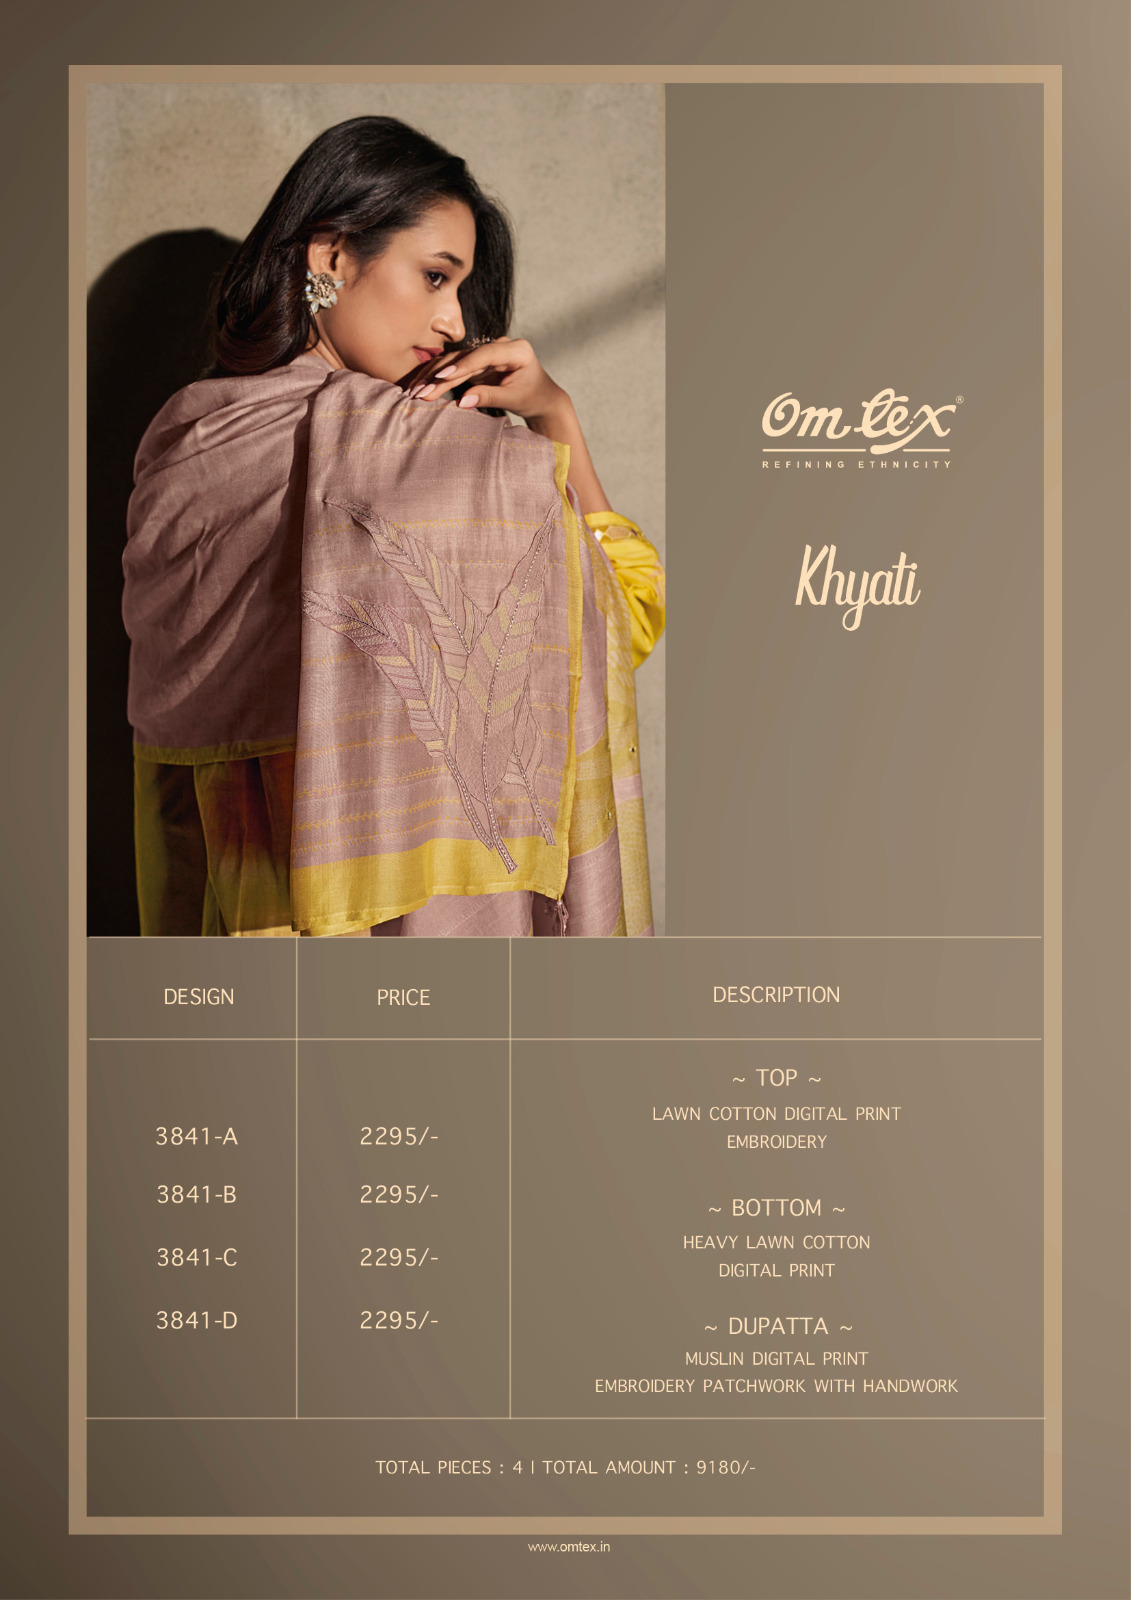 Omtex Khyati collection 8